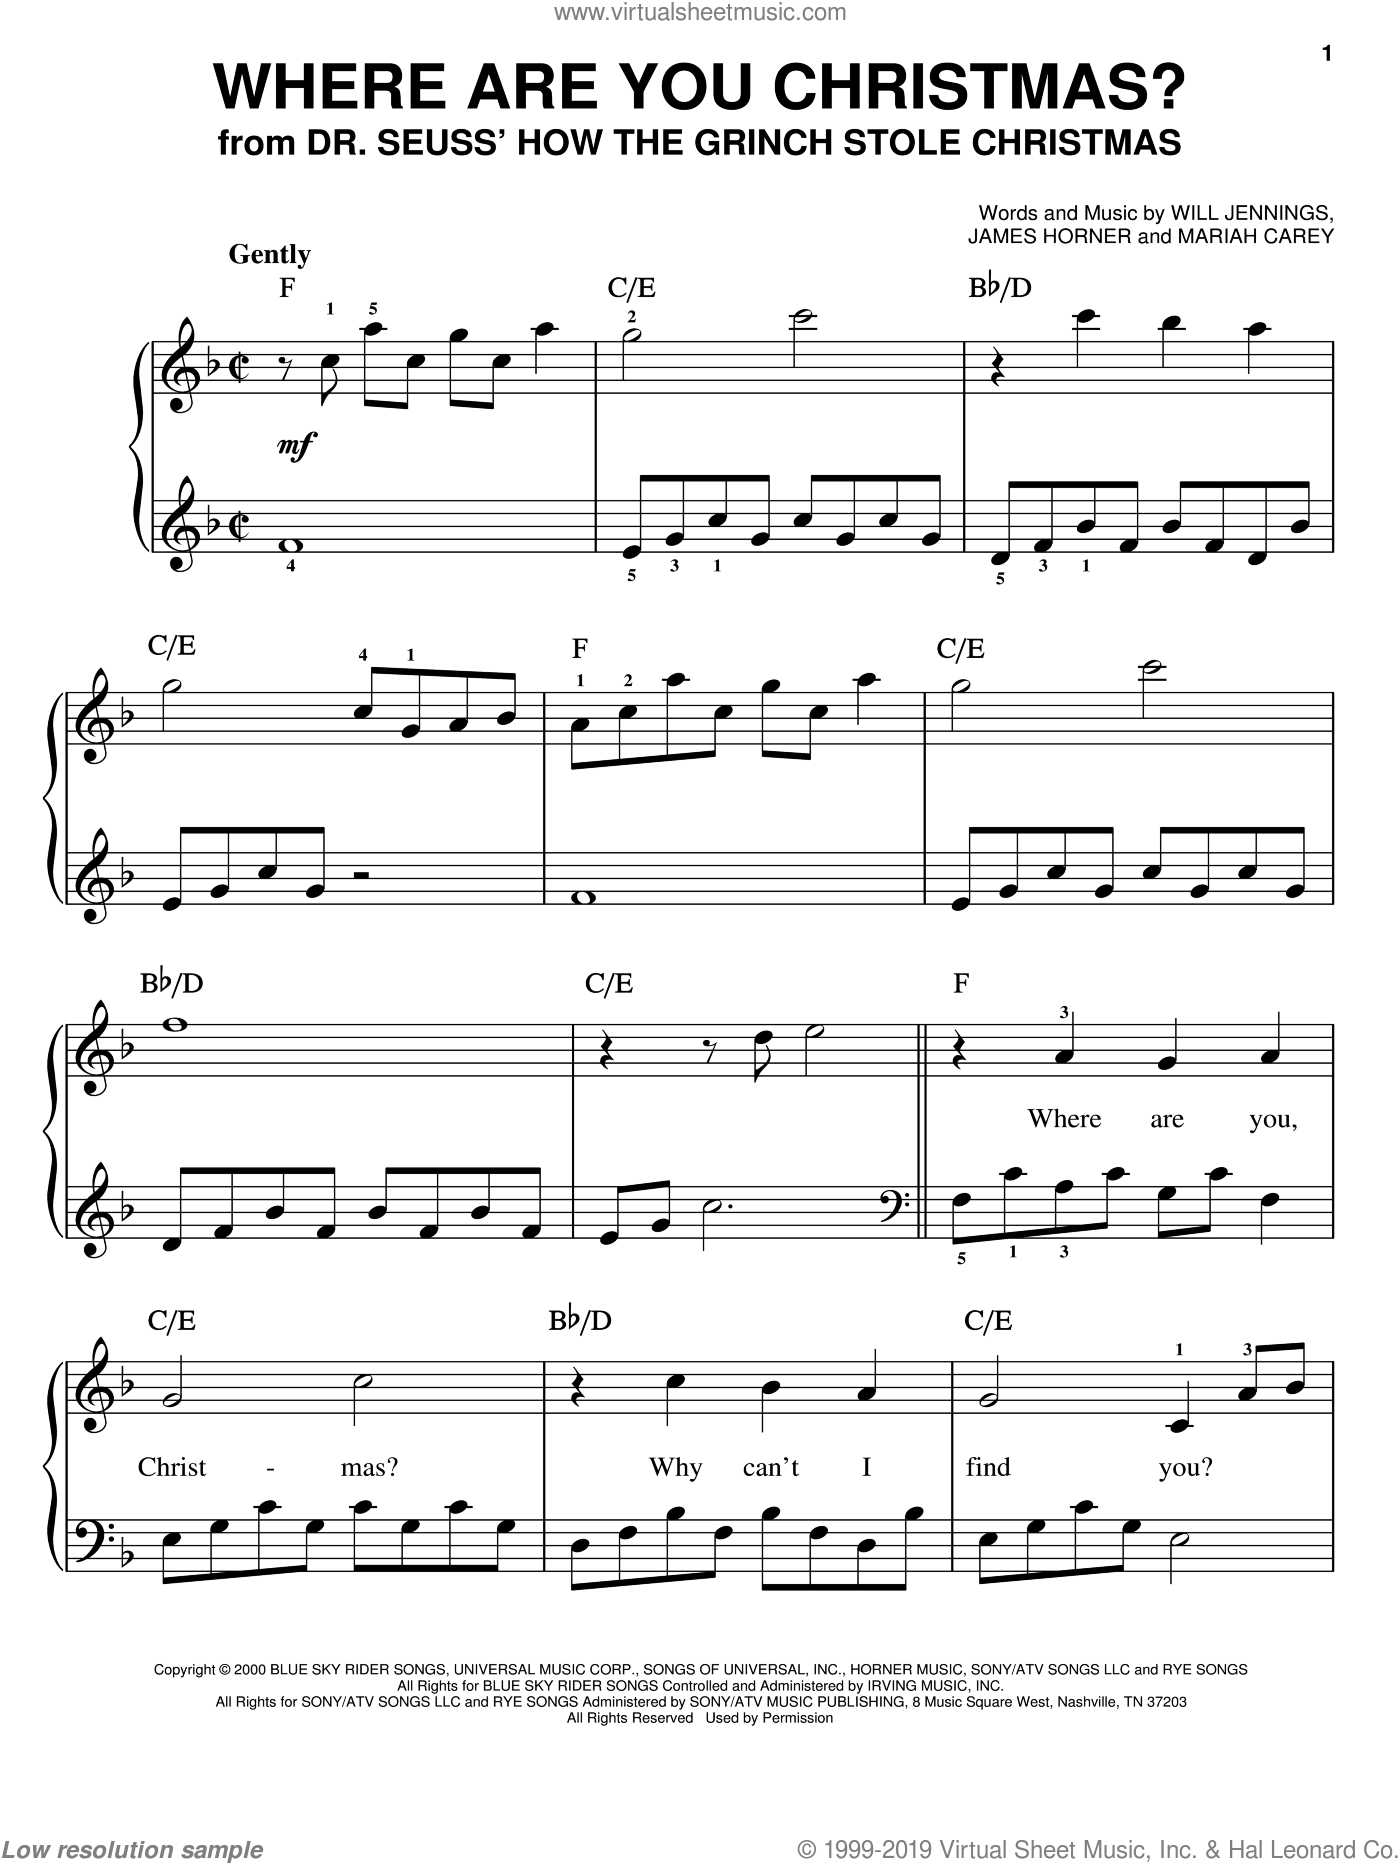 Hill - Where Are You Christmas? (from How The Grinch Stole Christmas) sheet music for piano solo